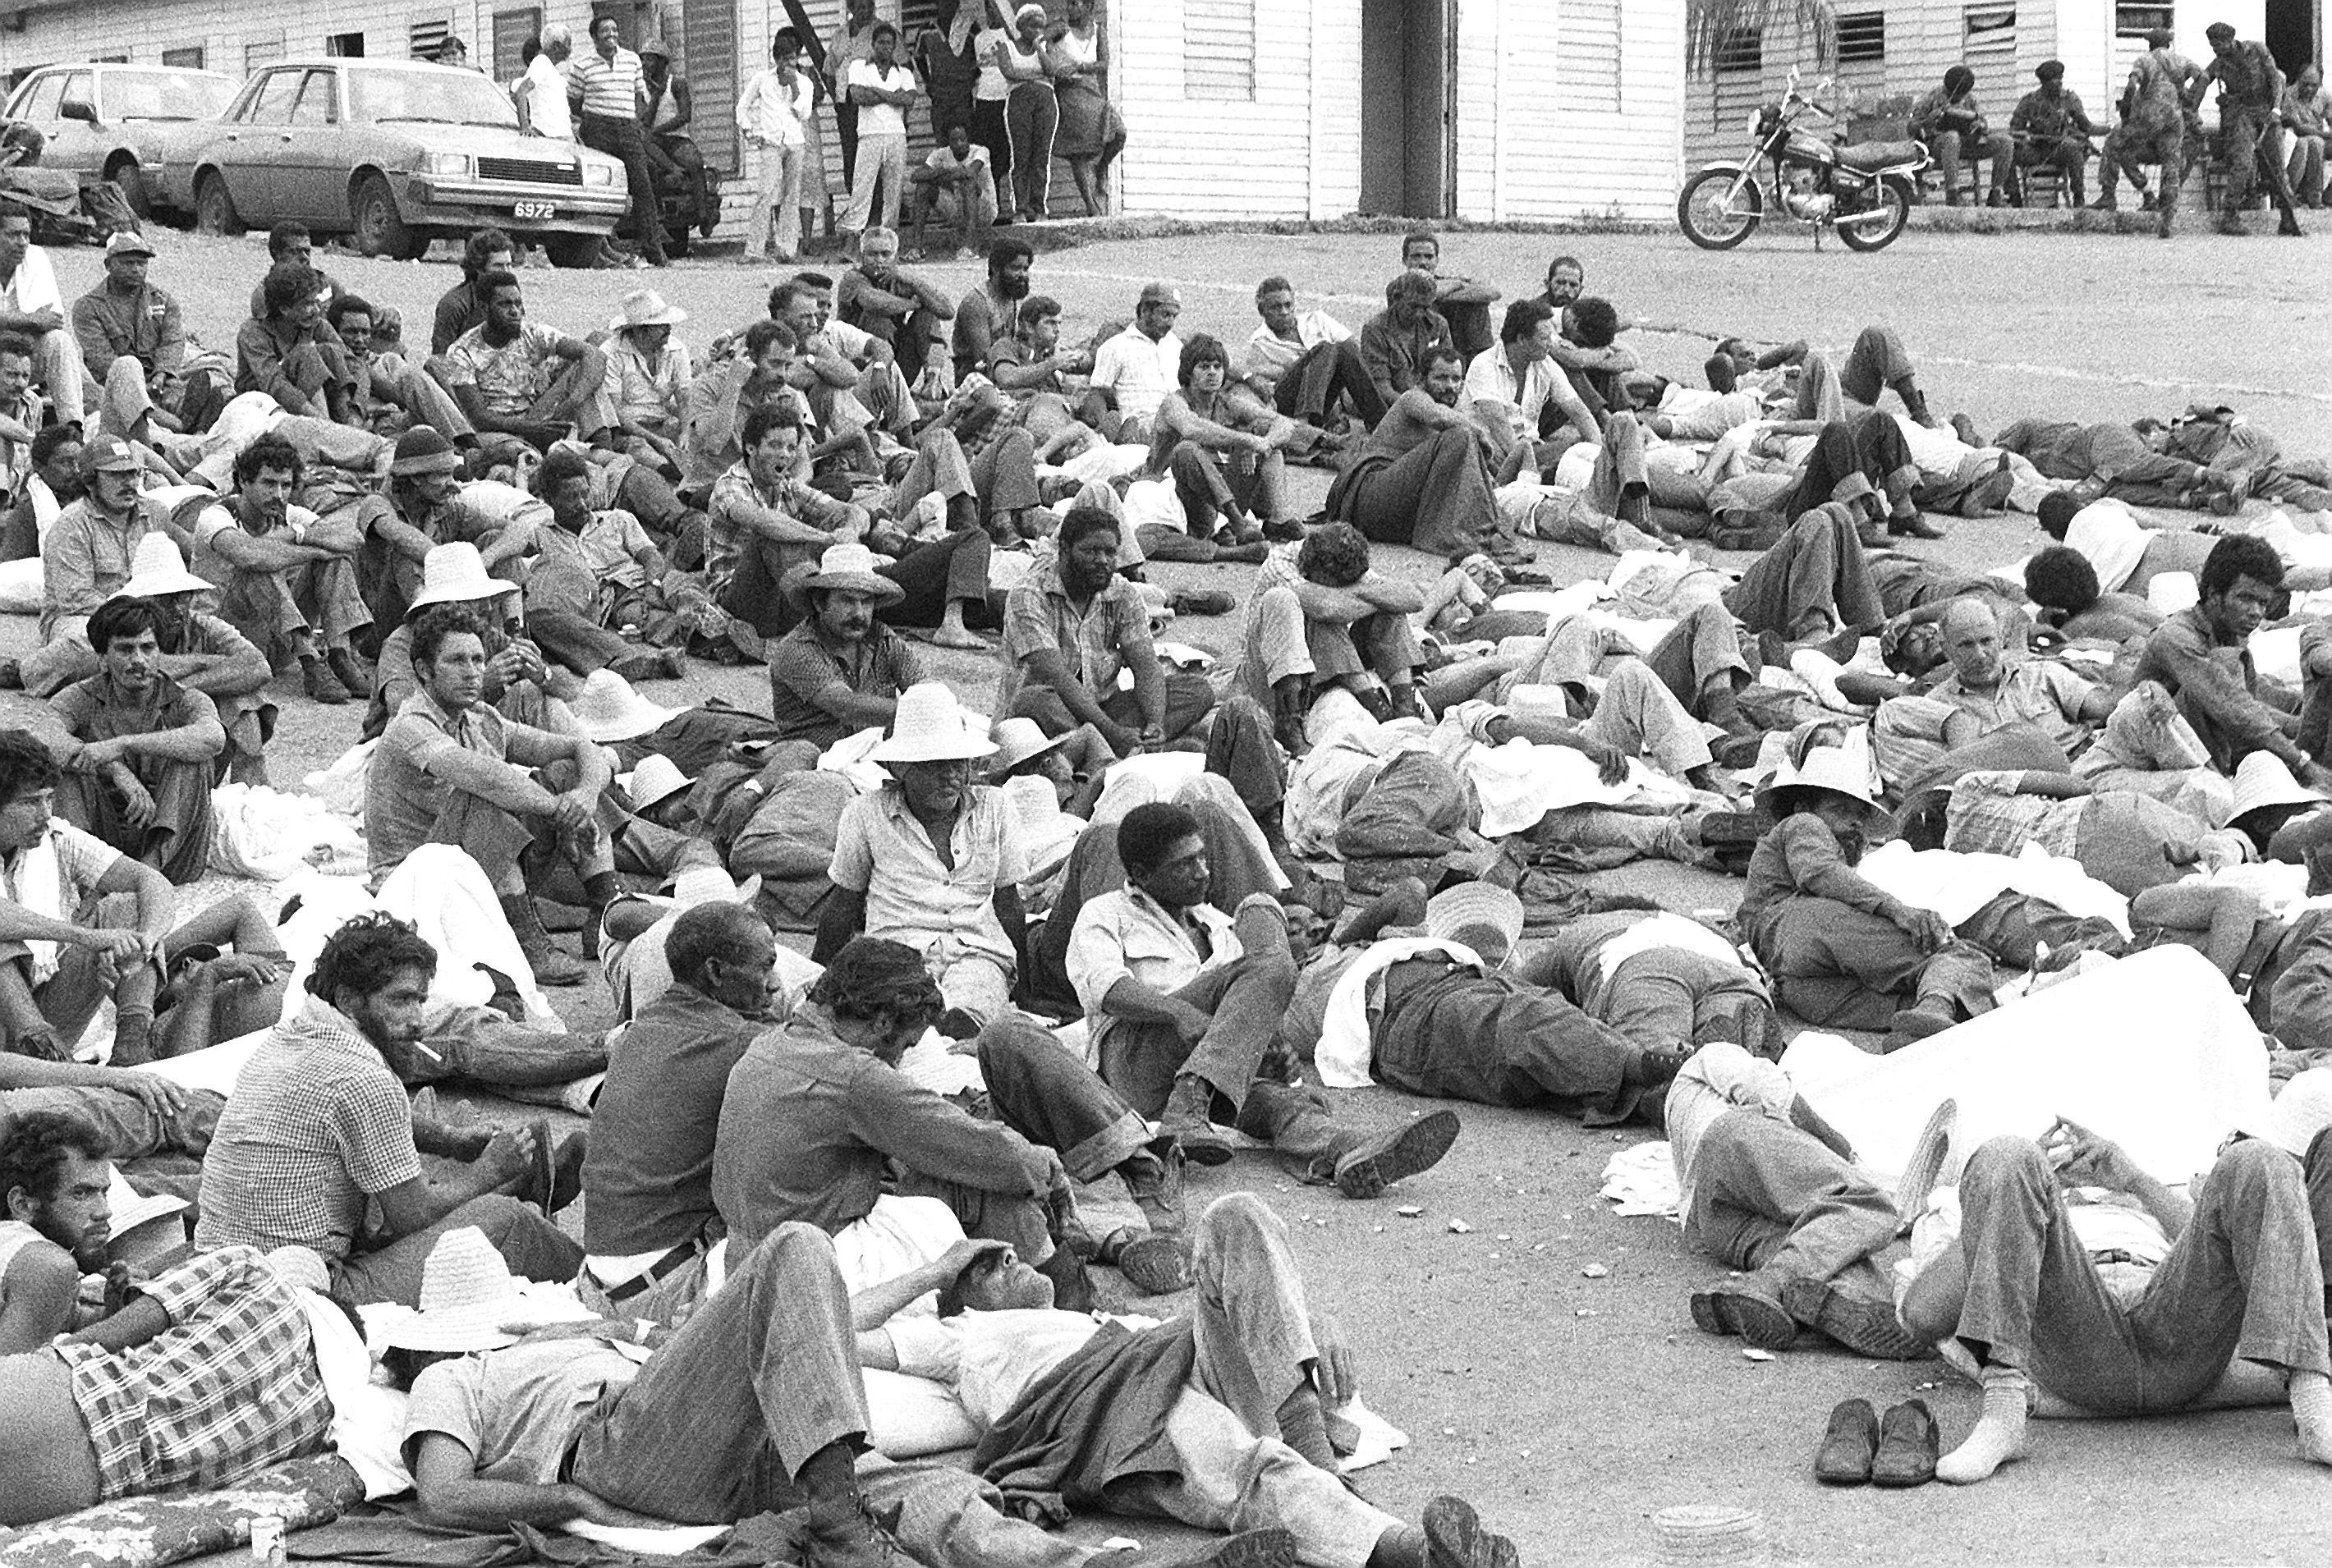 cuban-nationals-sit-in-a-holding-area-awaiting-their-departure-from-the-island-912a47.jpg